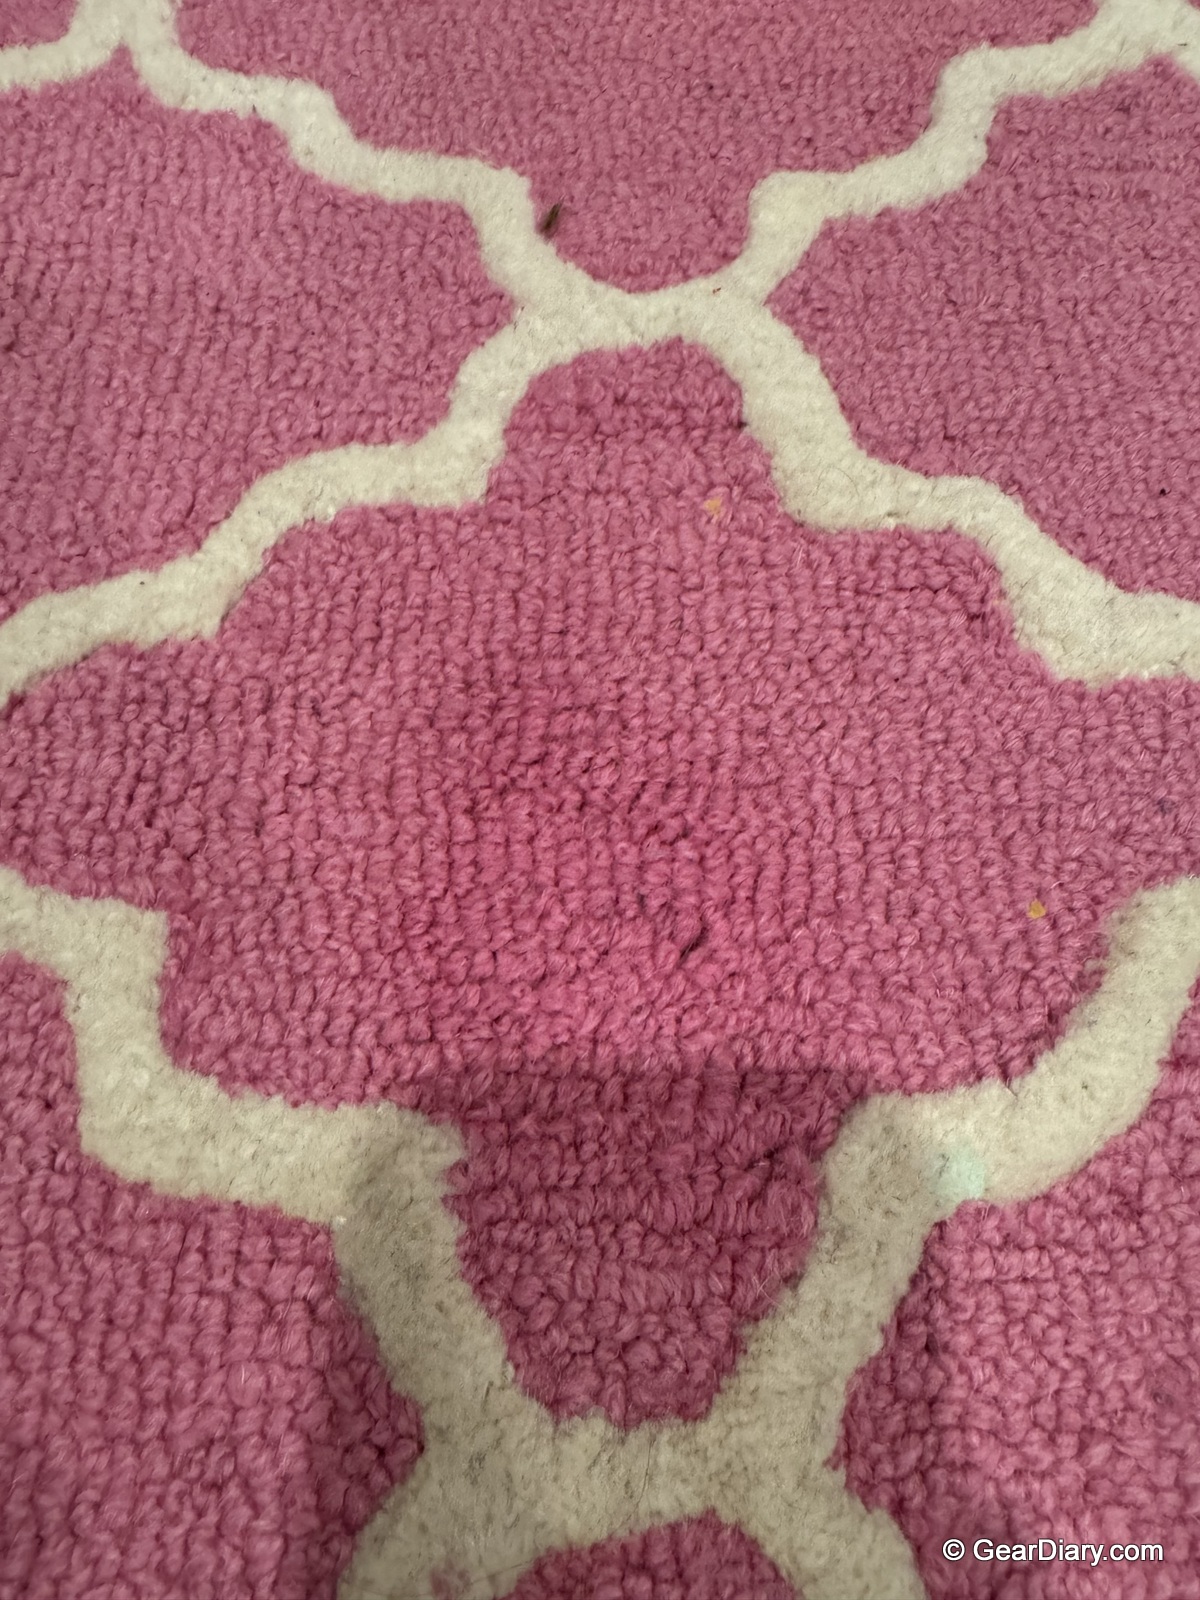 The rug after cleaning with the Bissell Little Green HydroSteam Pet